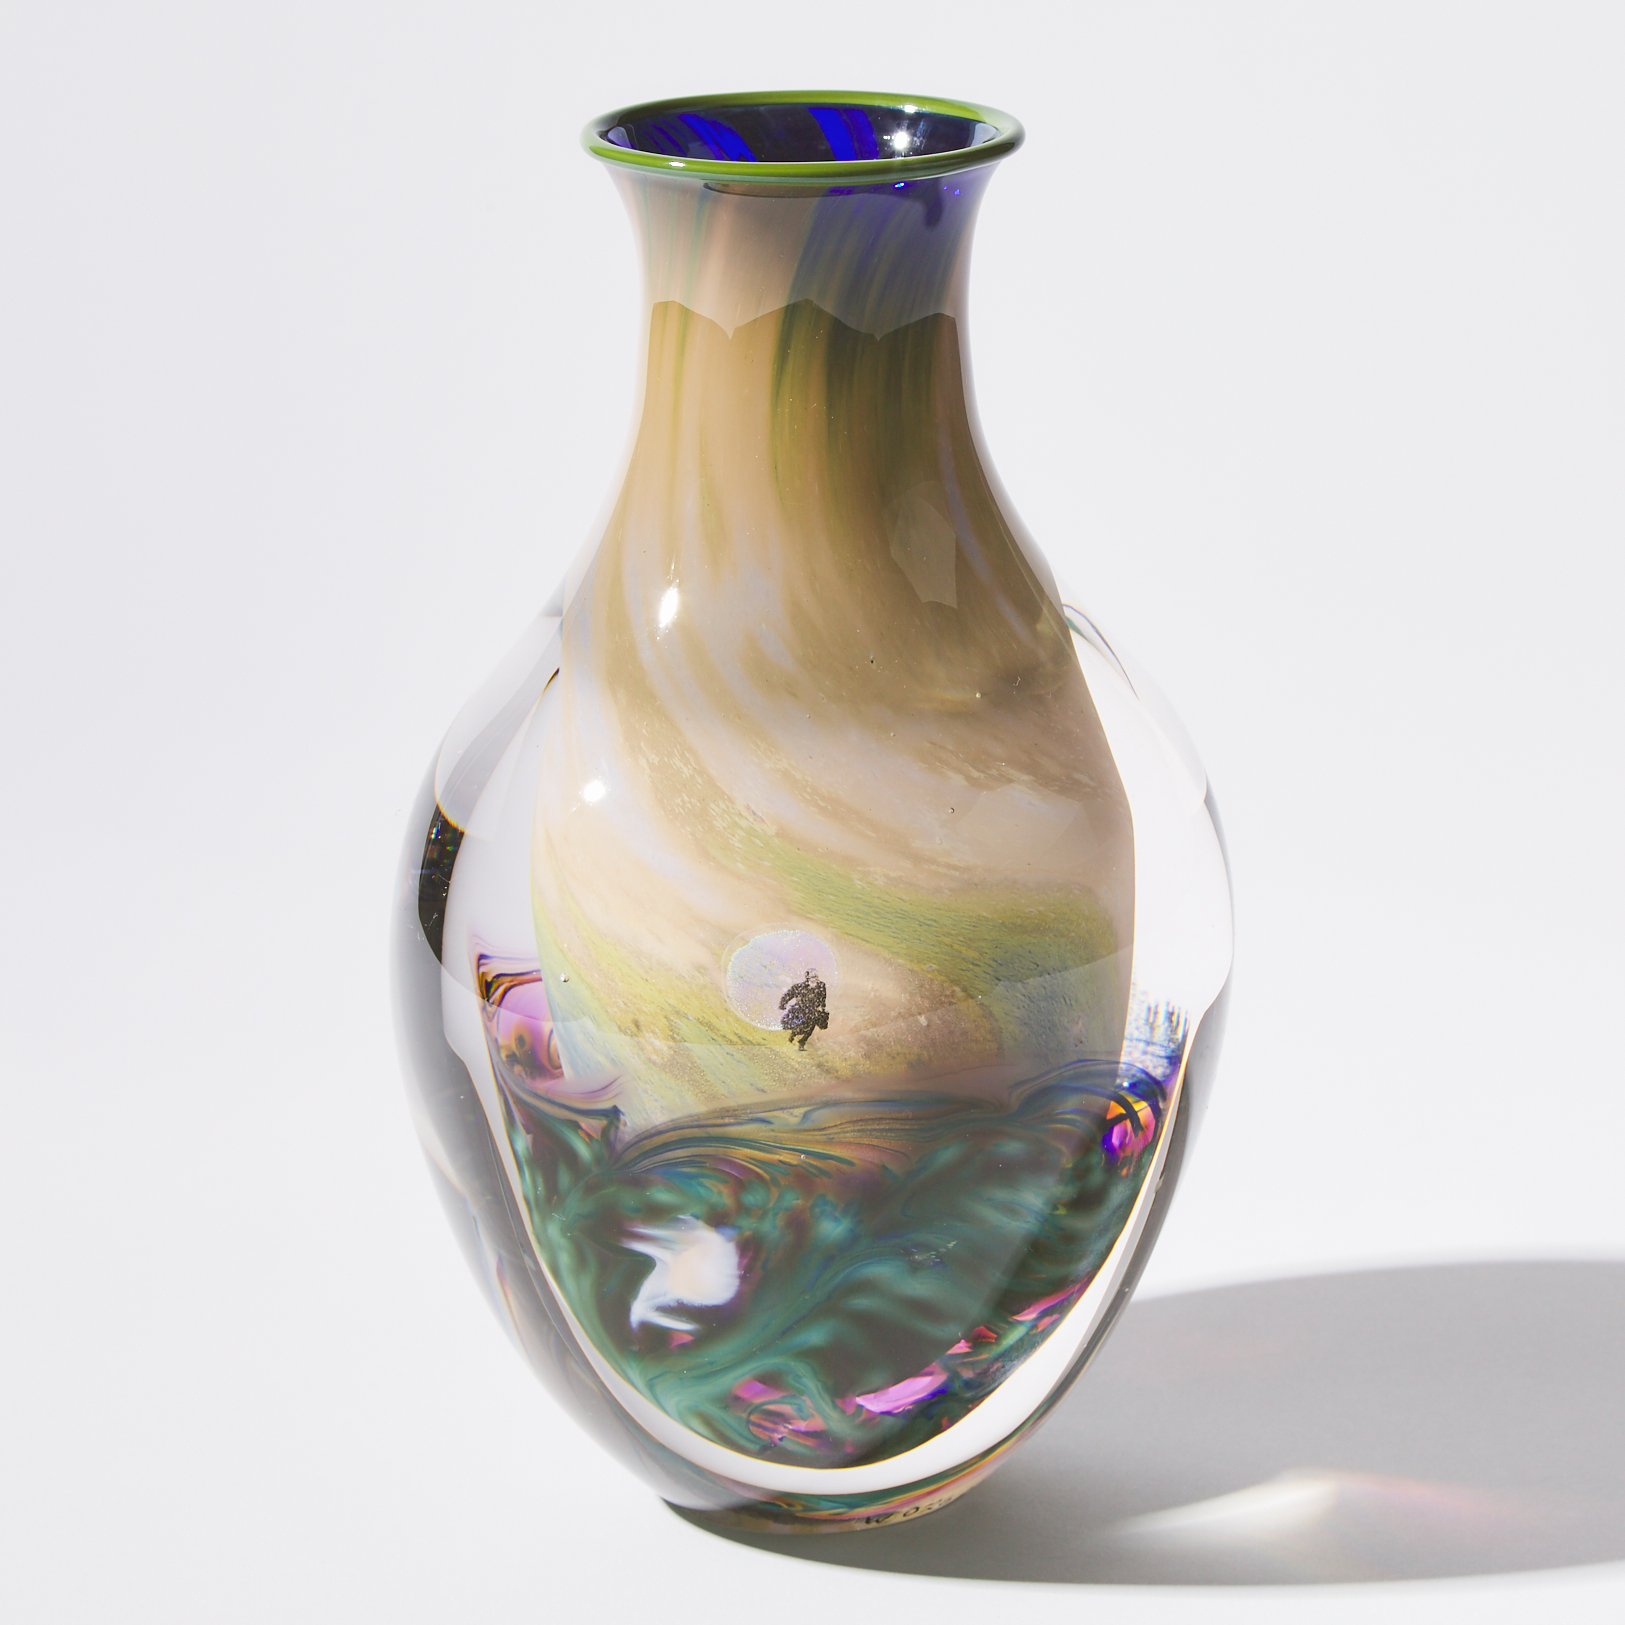 Toan Klein (American/Canadian, b.1949), Internally Decorated Gatographic Paperweight Glass Vase, 2001